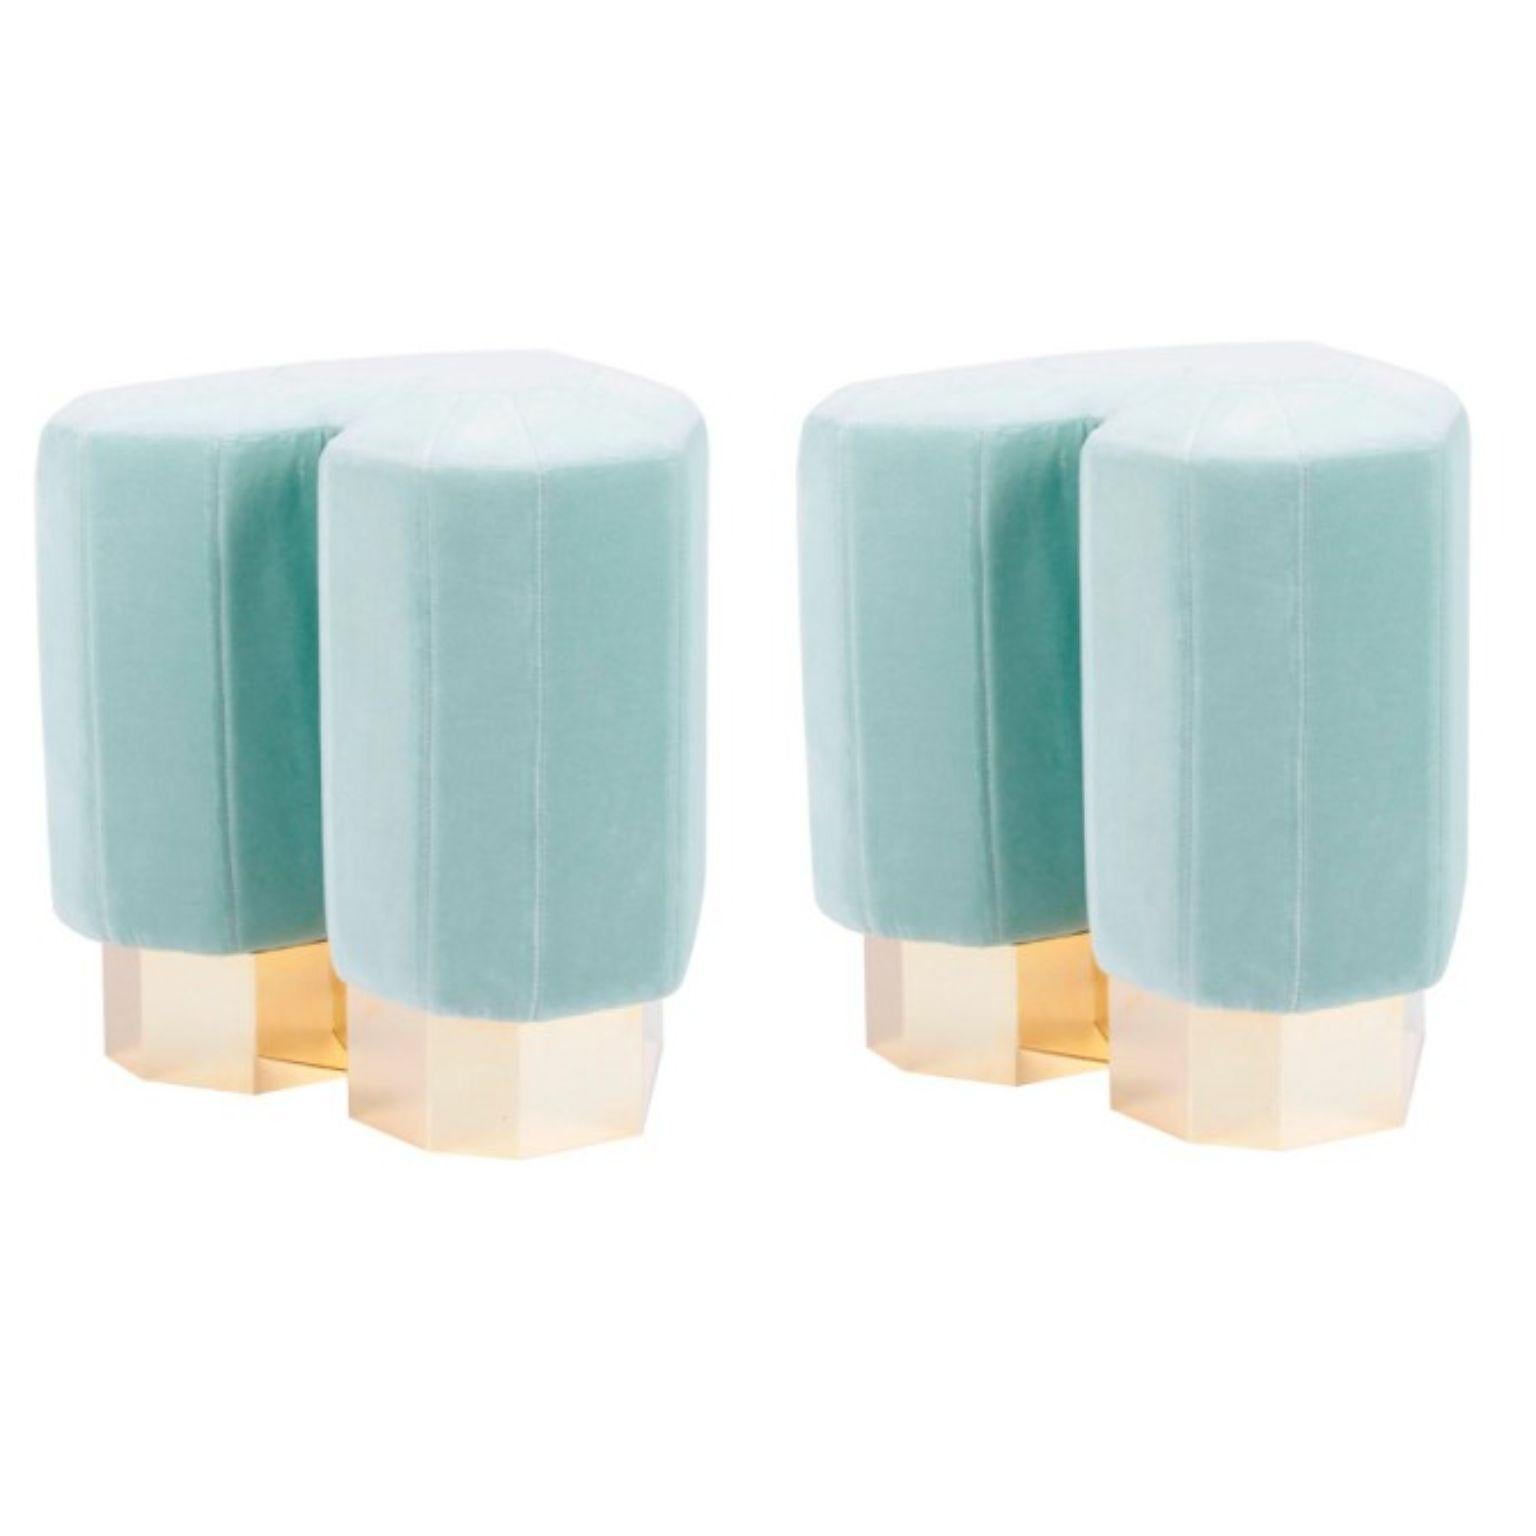 Set of 2 mint green queen heart stools by Royal Stranger
Dimensions: 46 x 49 x 43 cm
Different upholstery colors and finishes are available. Brass, copper or stainless steel in polished or brushed finish.
Materials: velvet heart shape upholstery